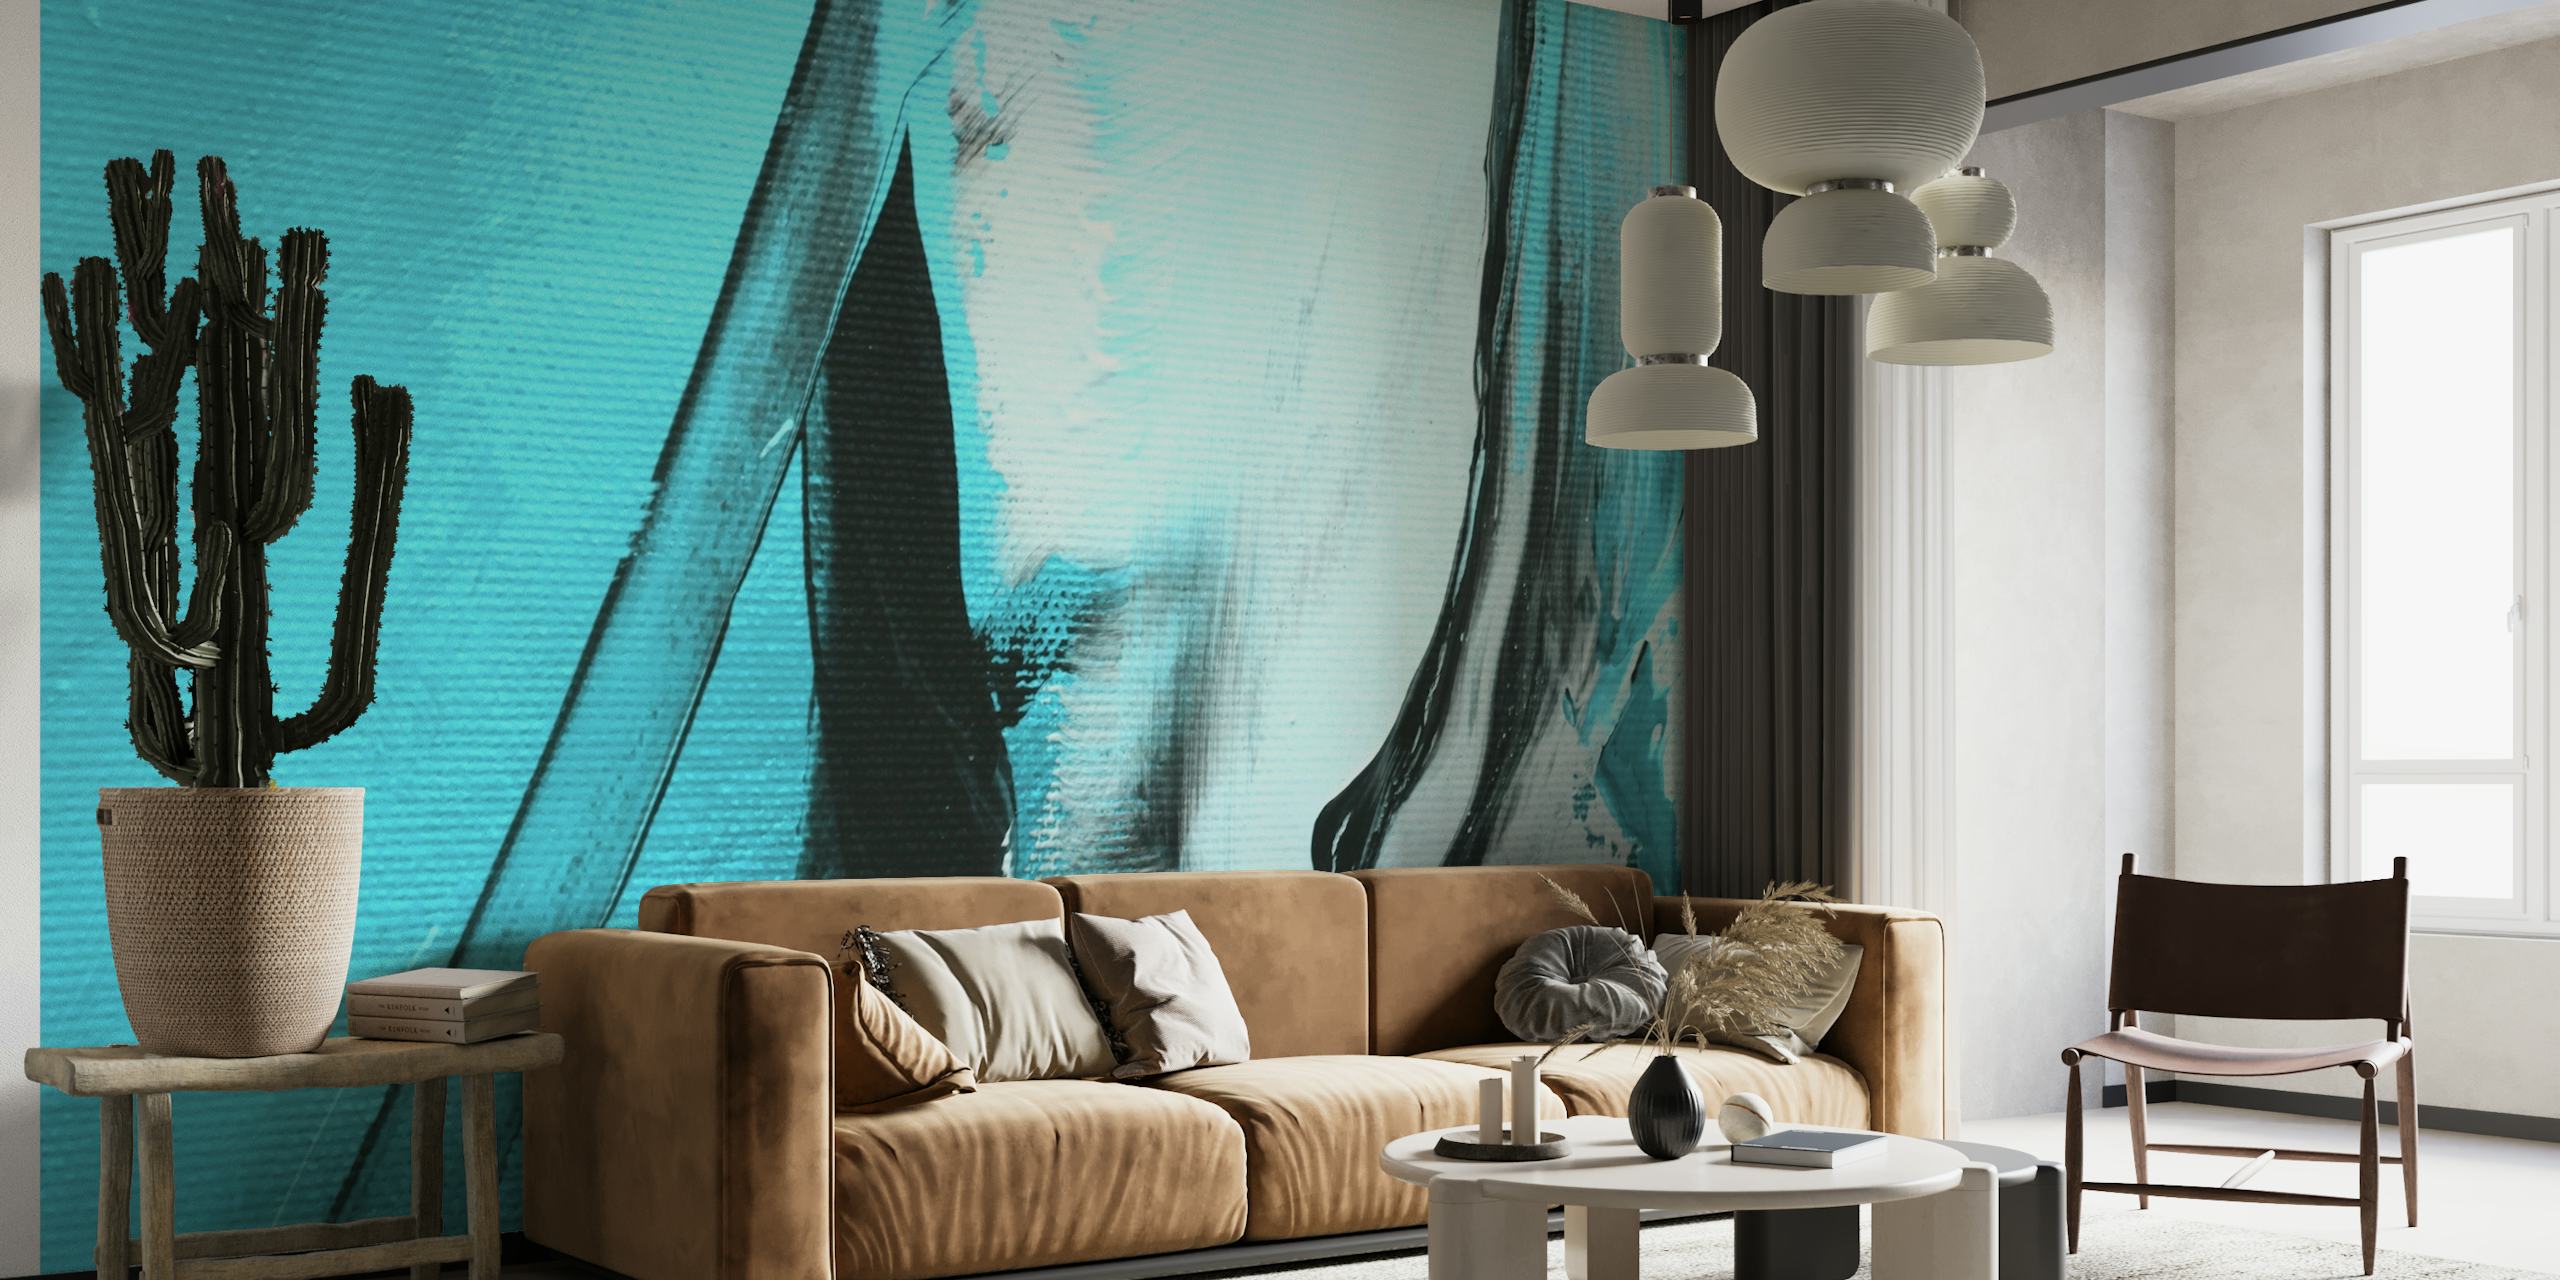 Turquoise Meets Black Abstract Art wallpaper